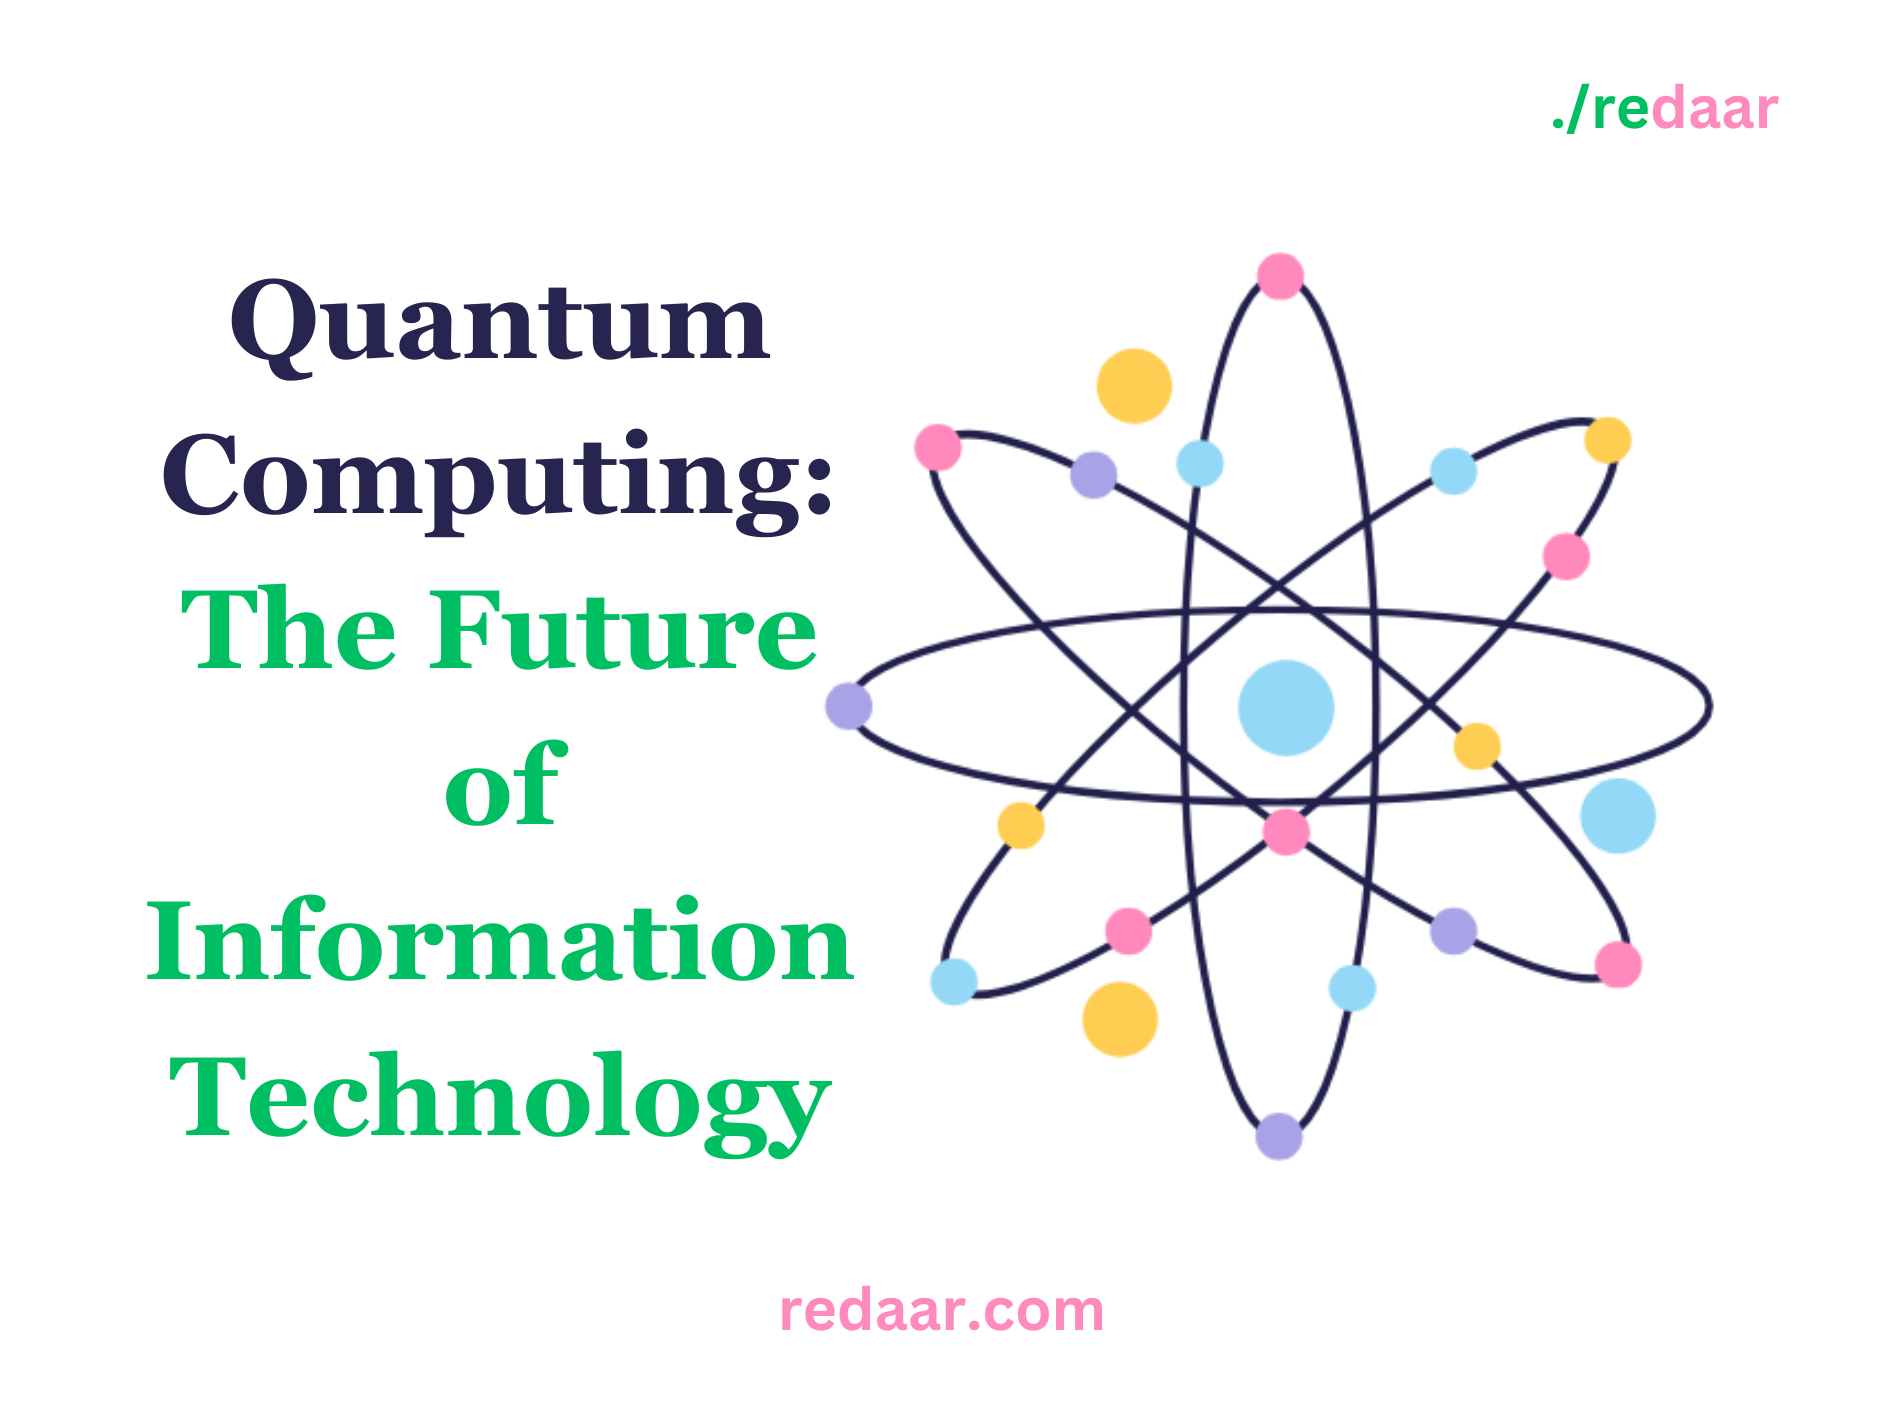 Quantum Computing: The Future of Information Technology